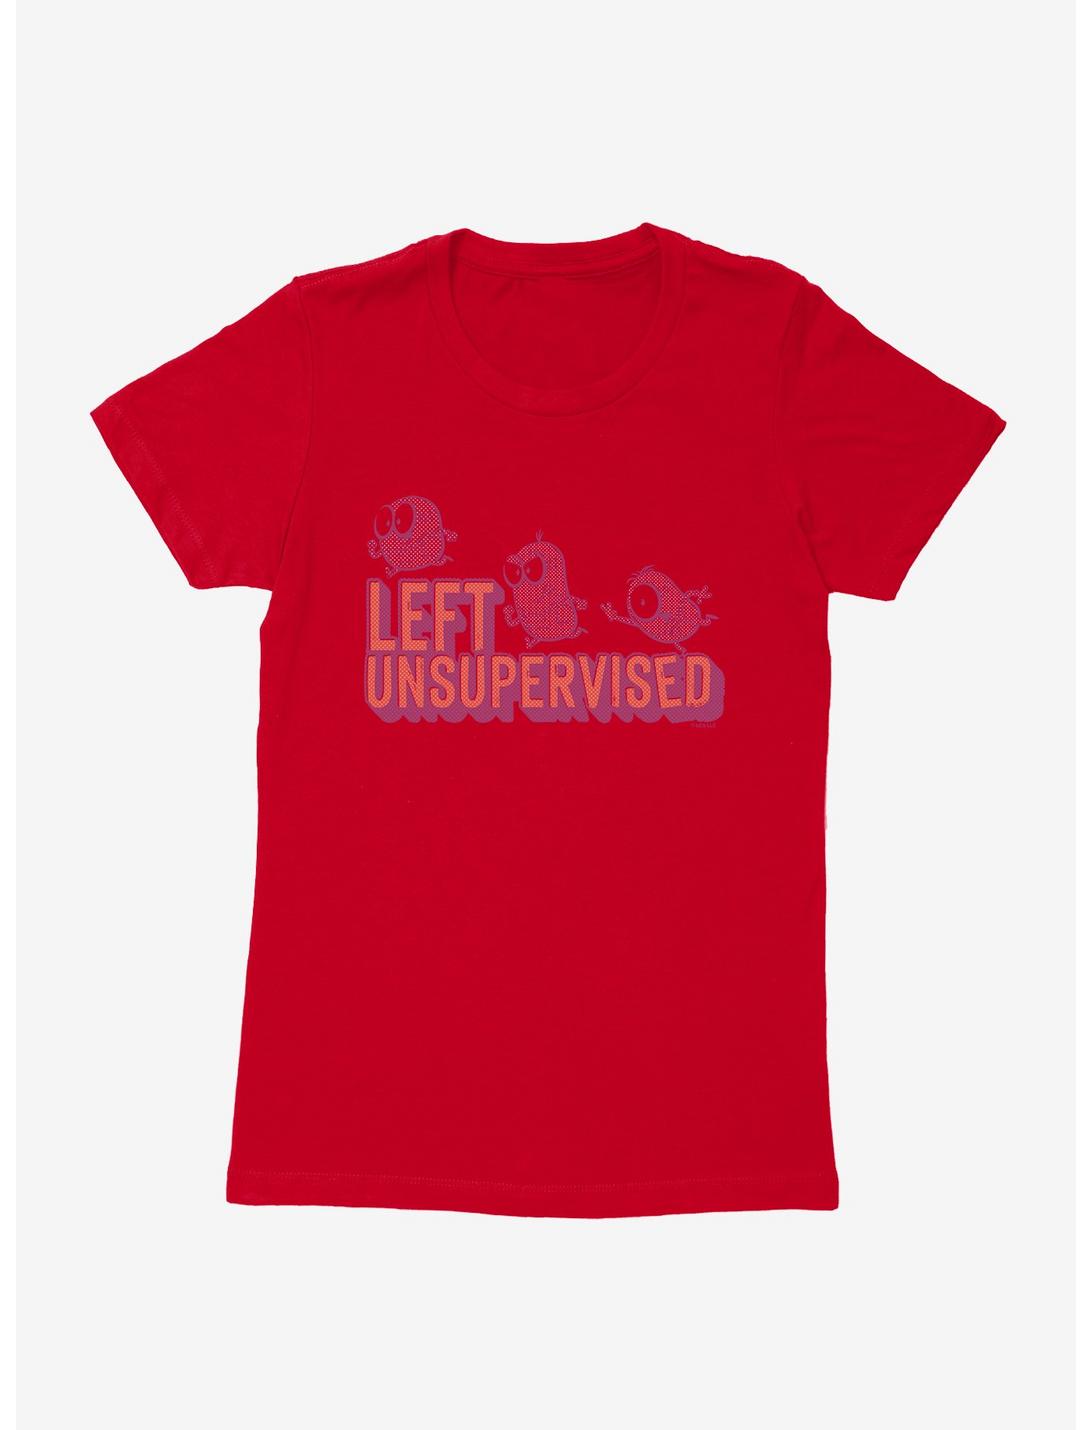 Minions Spotty Left Unsupervised Womens T-Shirt, RED, hi-res